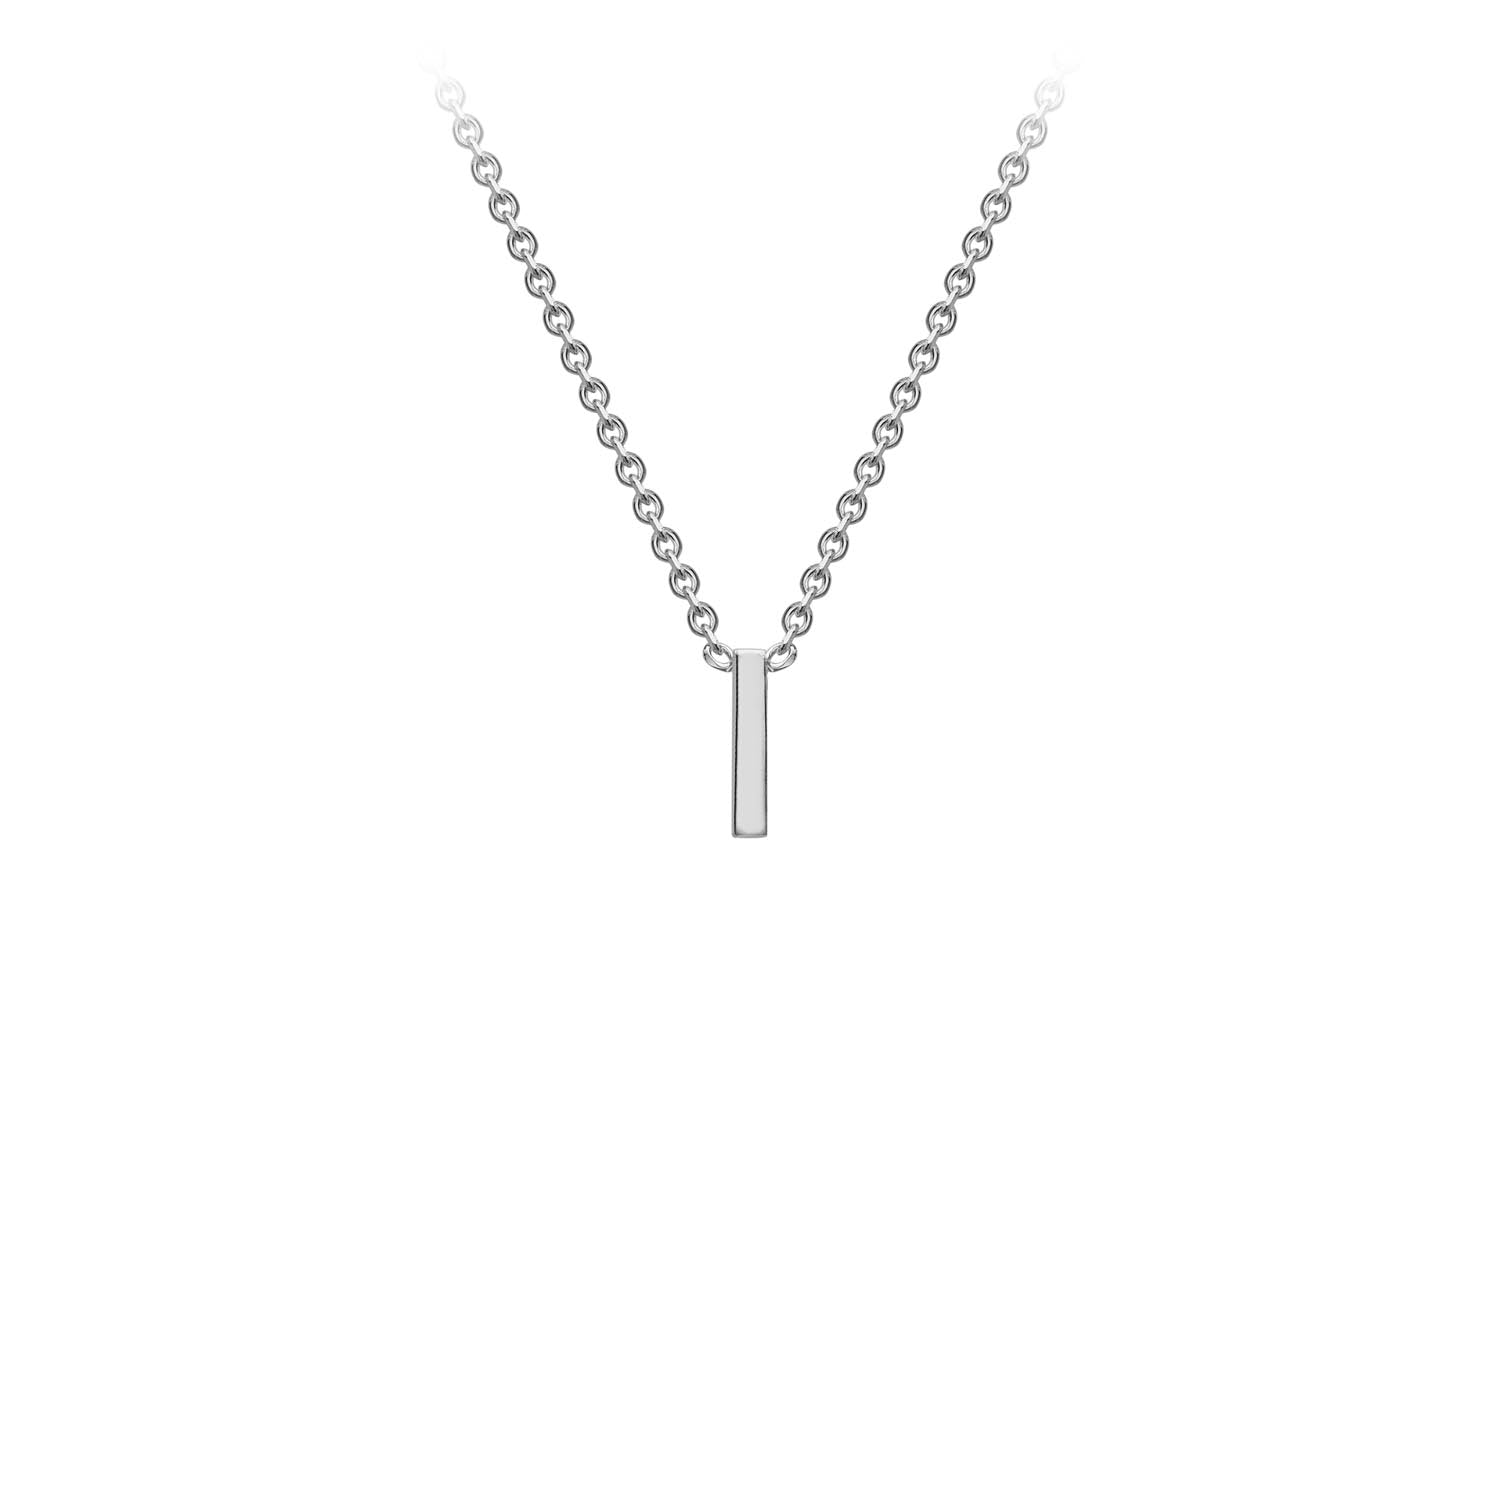 9ct W/G Initial Letter "I" Necklace 38+5cm